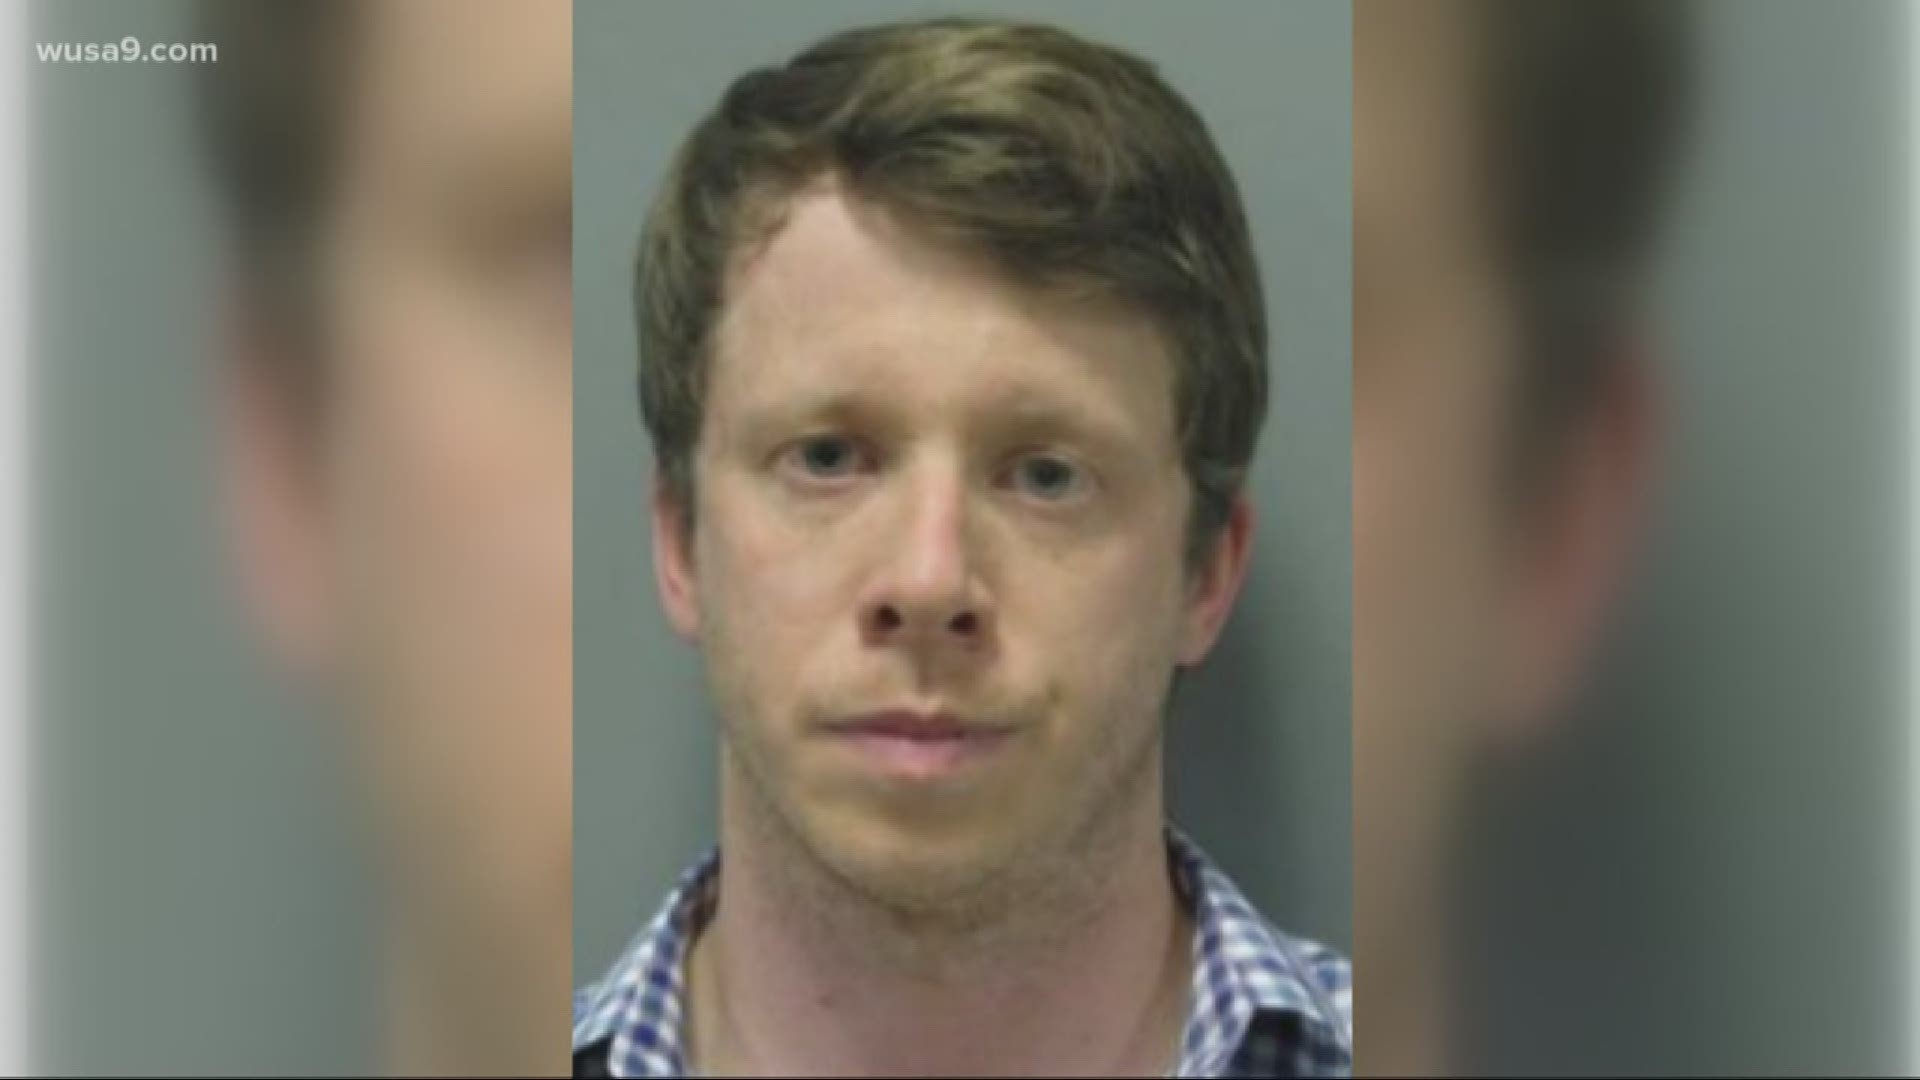 1920px x 1080px - Maryland man, 32, arrested for having sex with 14-year-old girl, police say  | wusa9.com